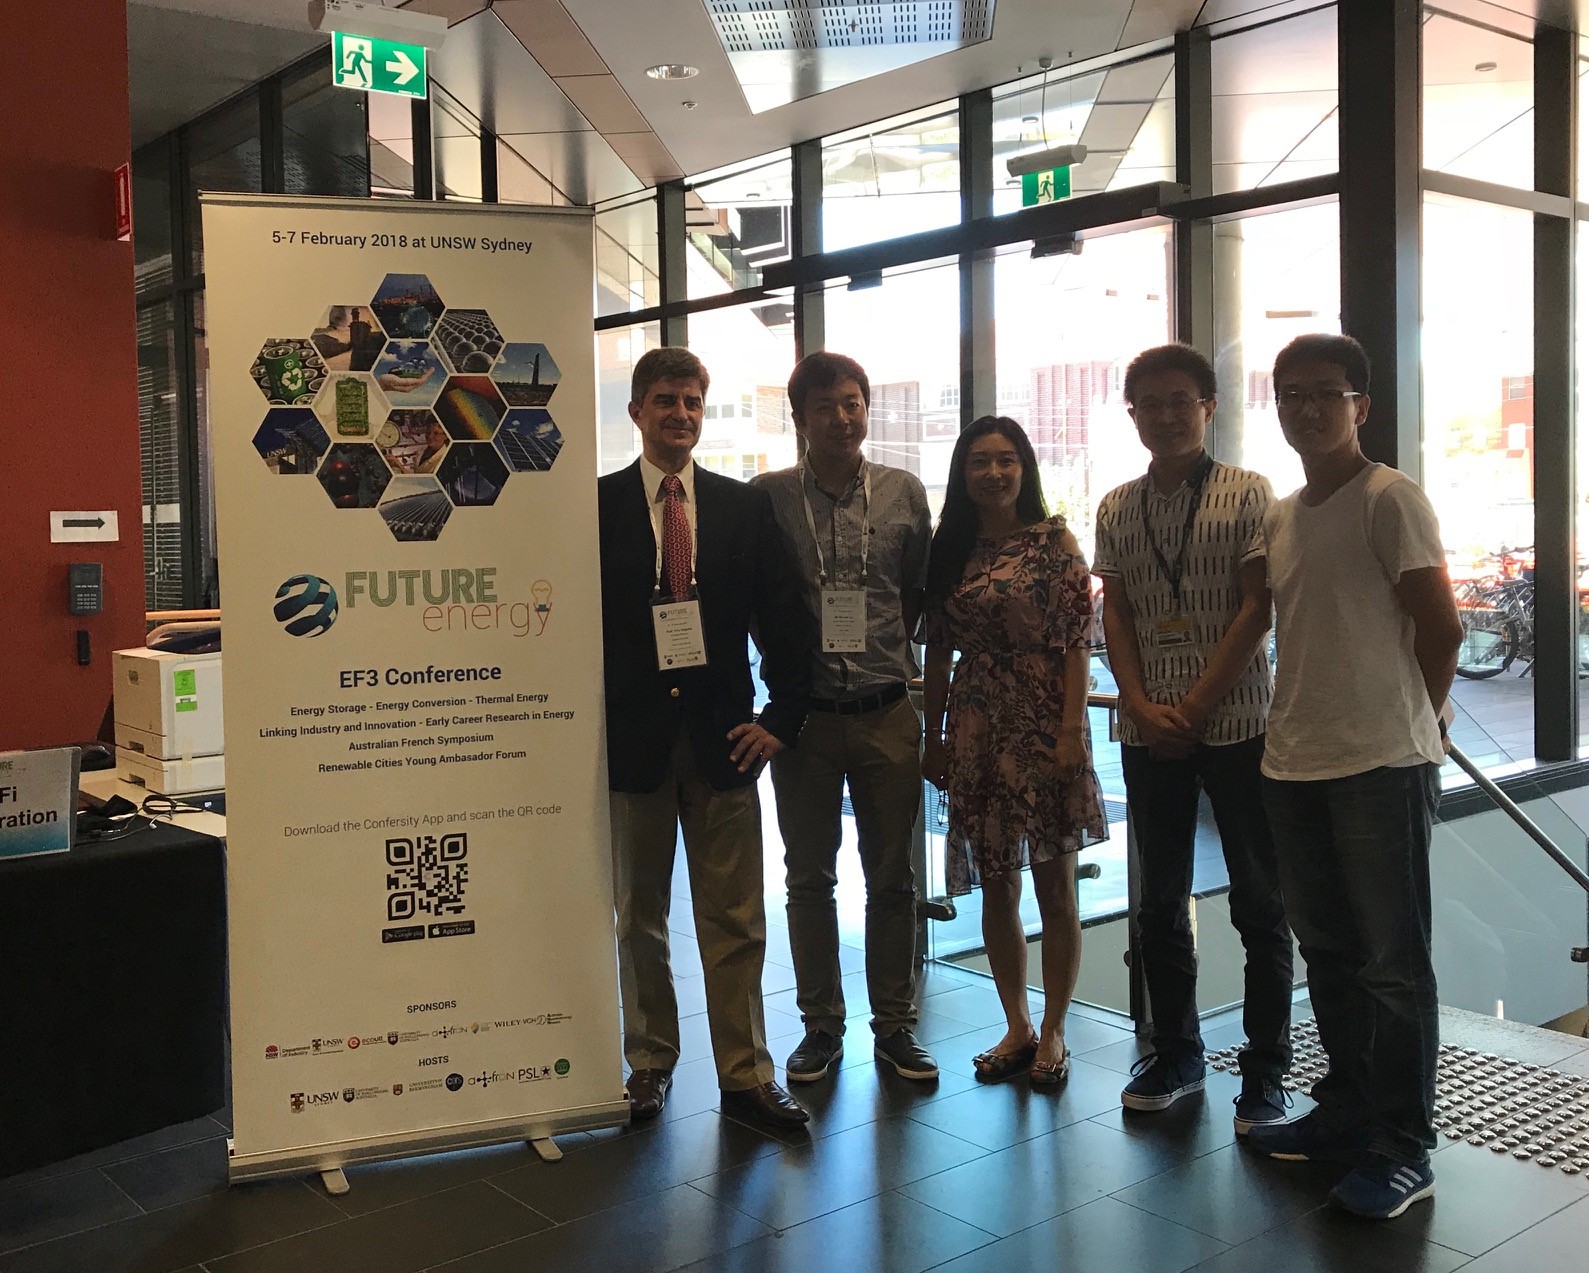 Professor Yury Gogotsi and his Australian collaborators - Professor Weiwei Lei from Deakin and his group, EF3 Conference 2018, Sidney, Australia